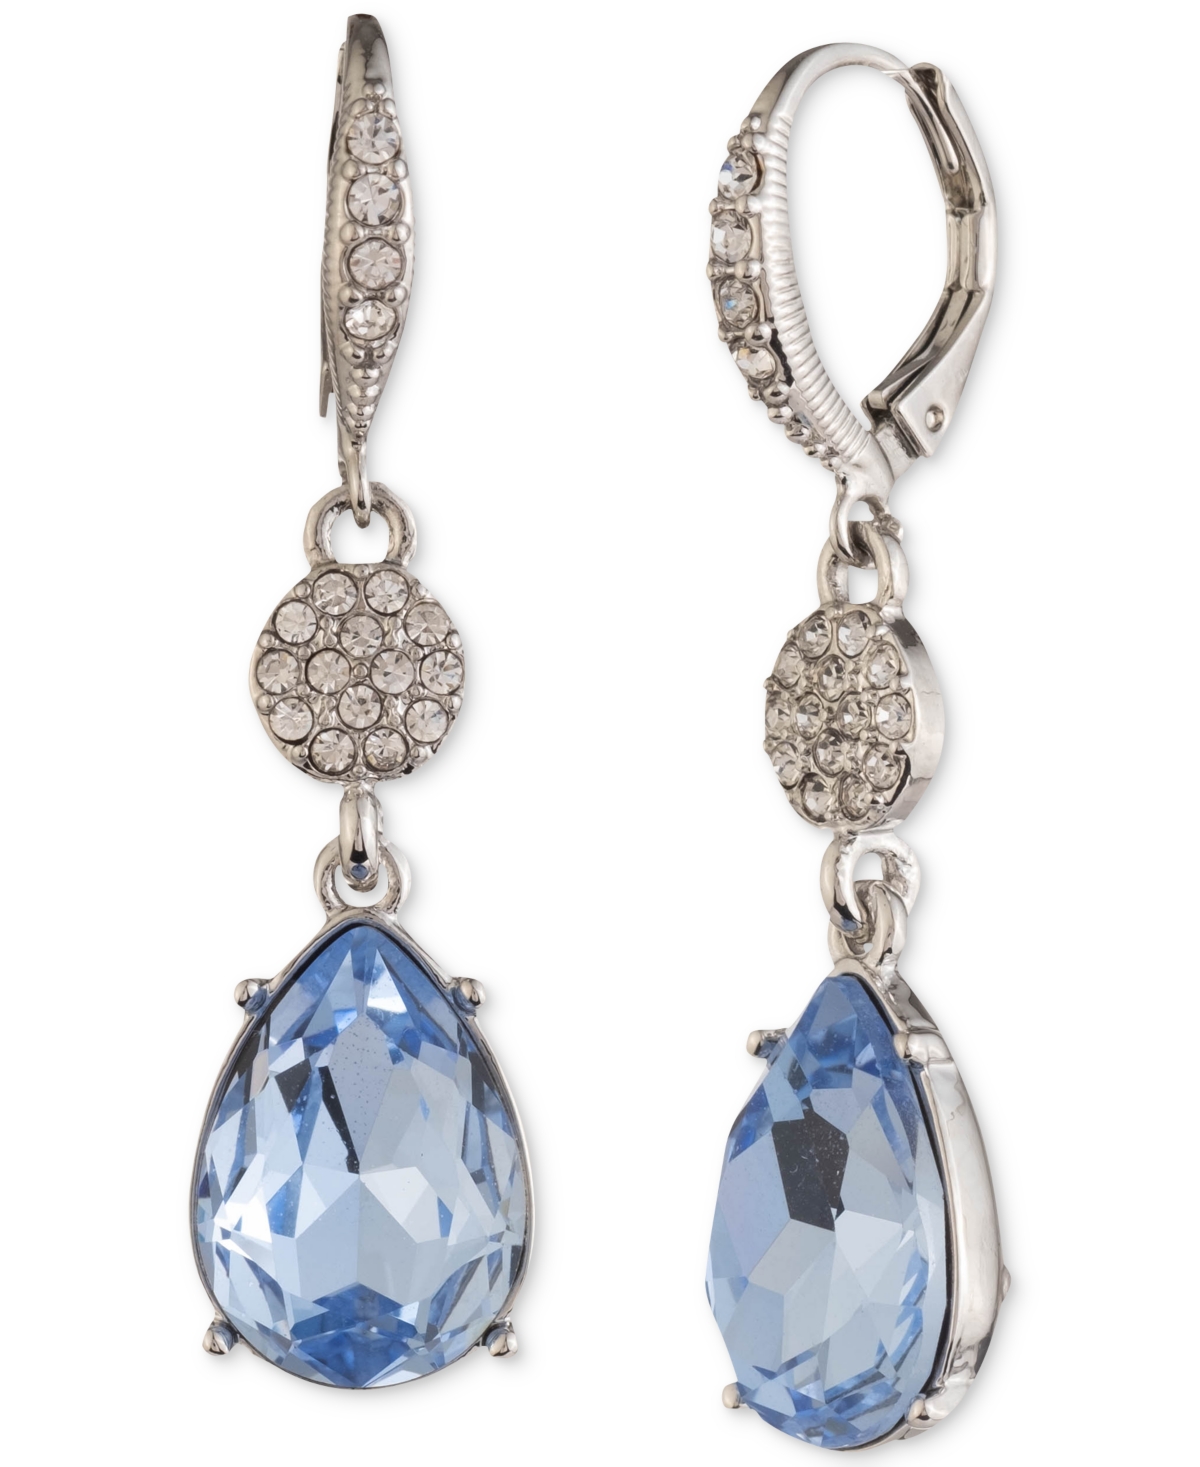 Givenchy Silver-Tone Crystal & Pave Crystal Double Drop Earrings